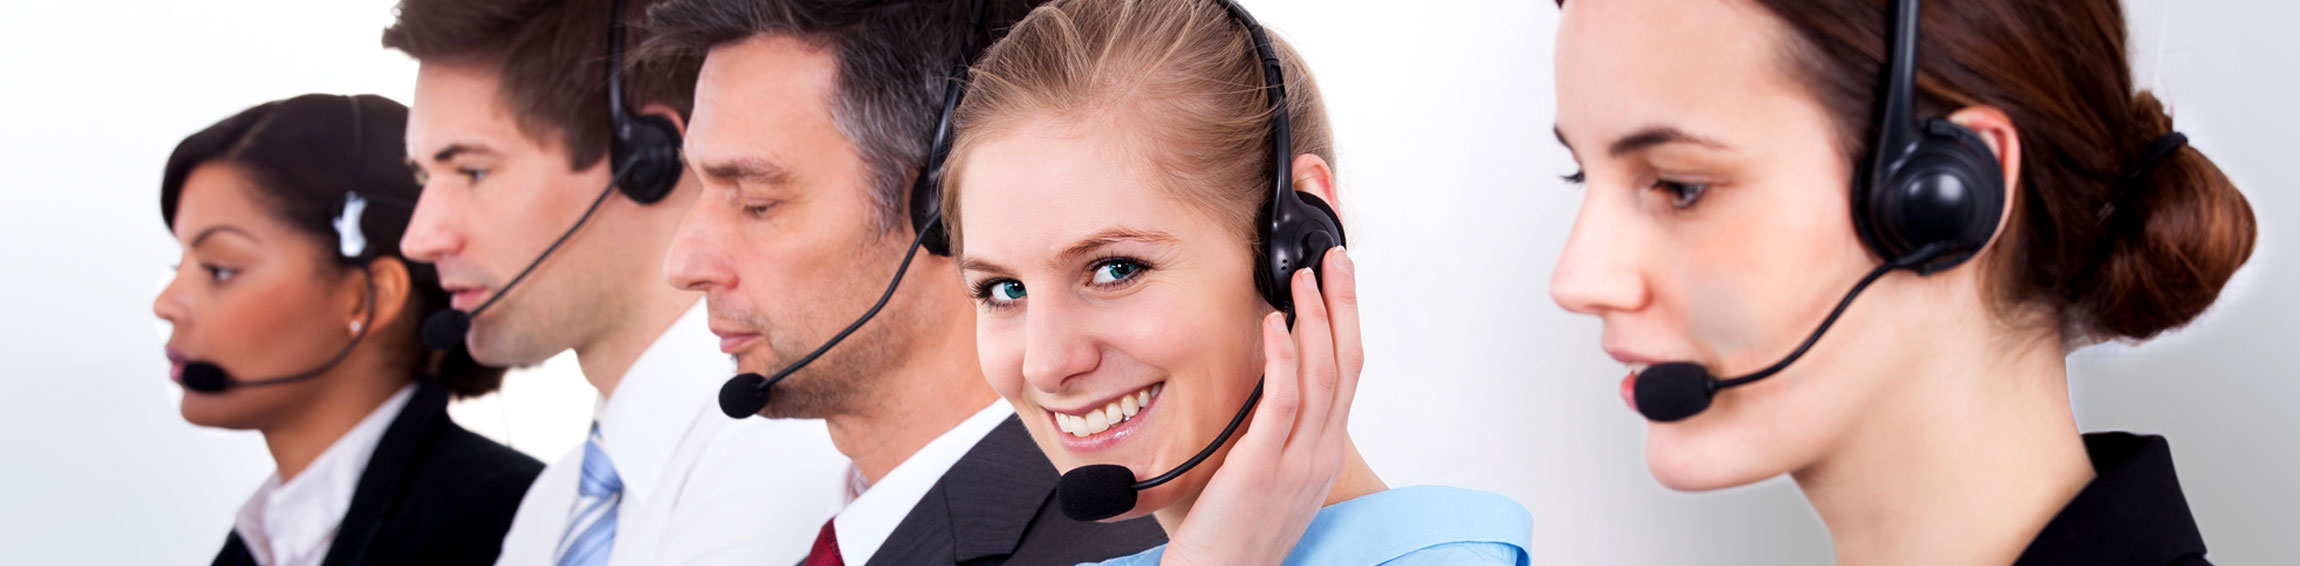 Customer service: Is ‘underpromising and overdelivering’ worth the effort?